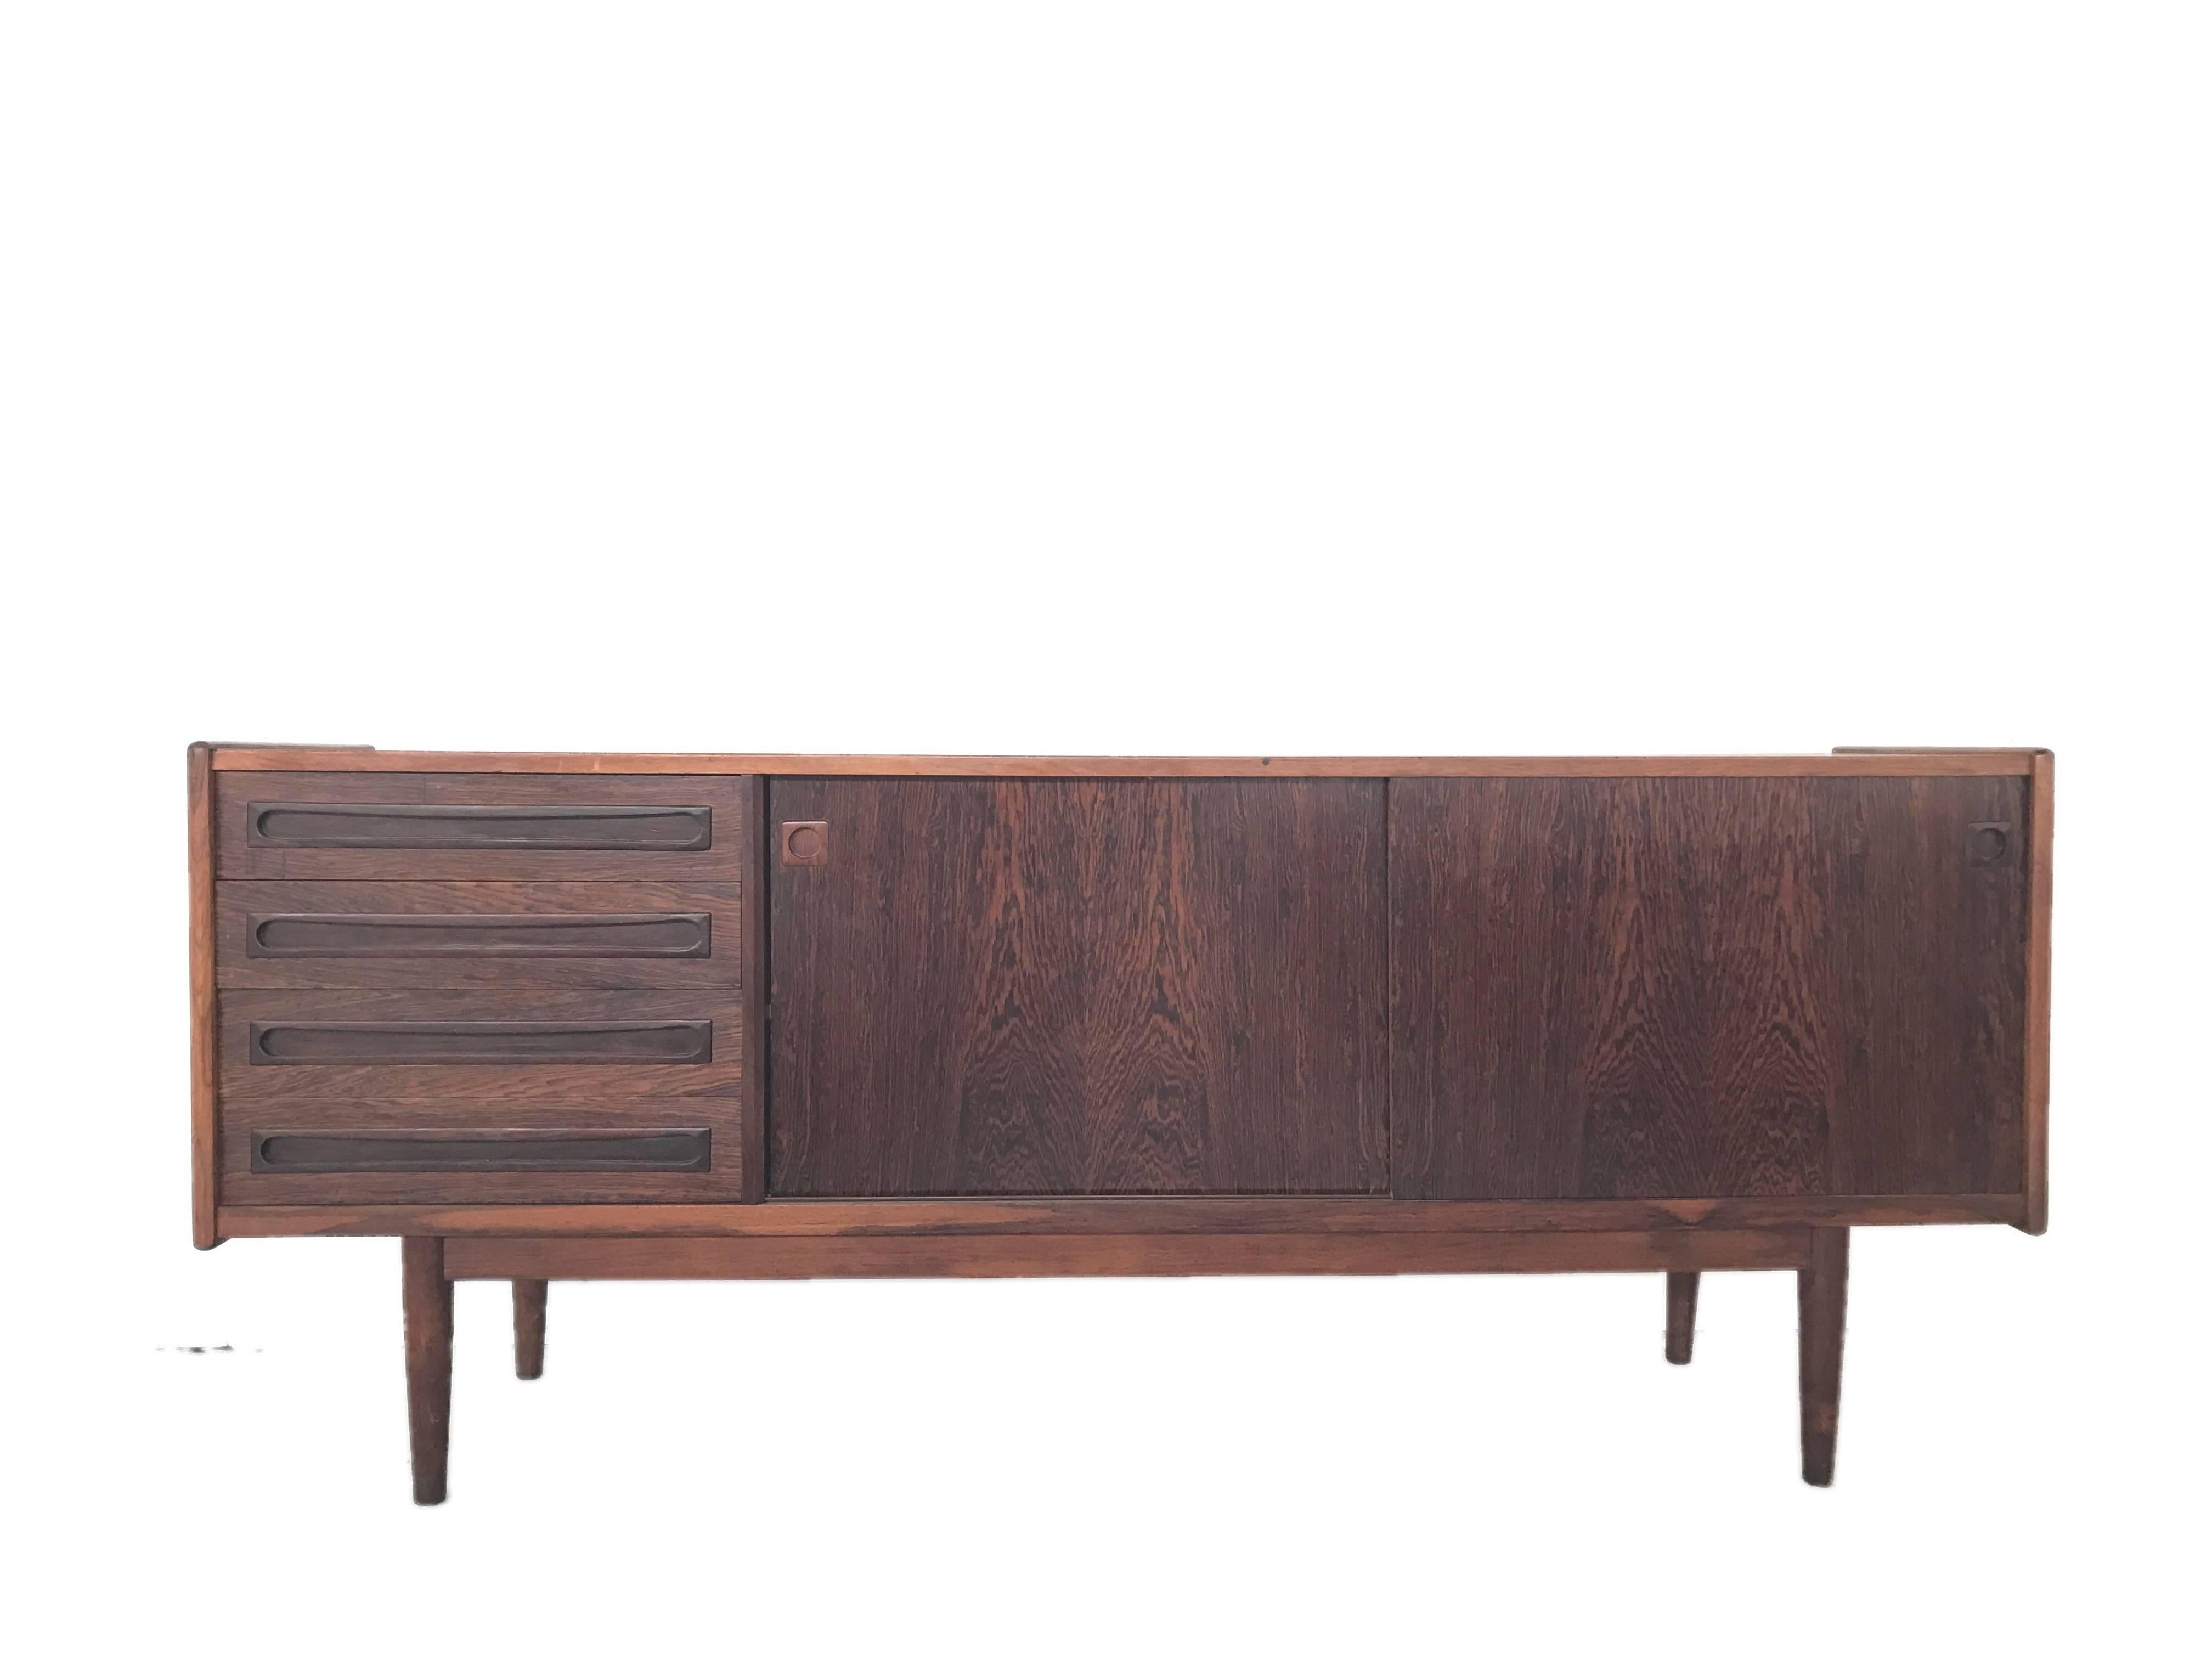 A beautiful rosewood Scandinavian dresser. This credenza is attributer to Ib Kofod-Larsen and is signed with a sticker of Danish control.
Four drawers and two sliding doors.
Leggs can be easily removed for mounting on the wall.